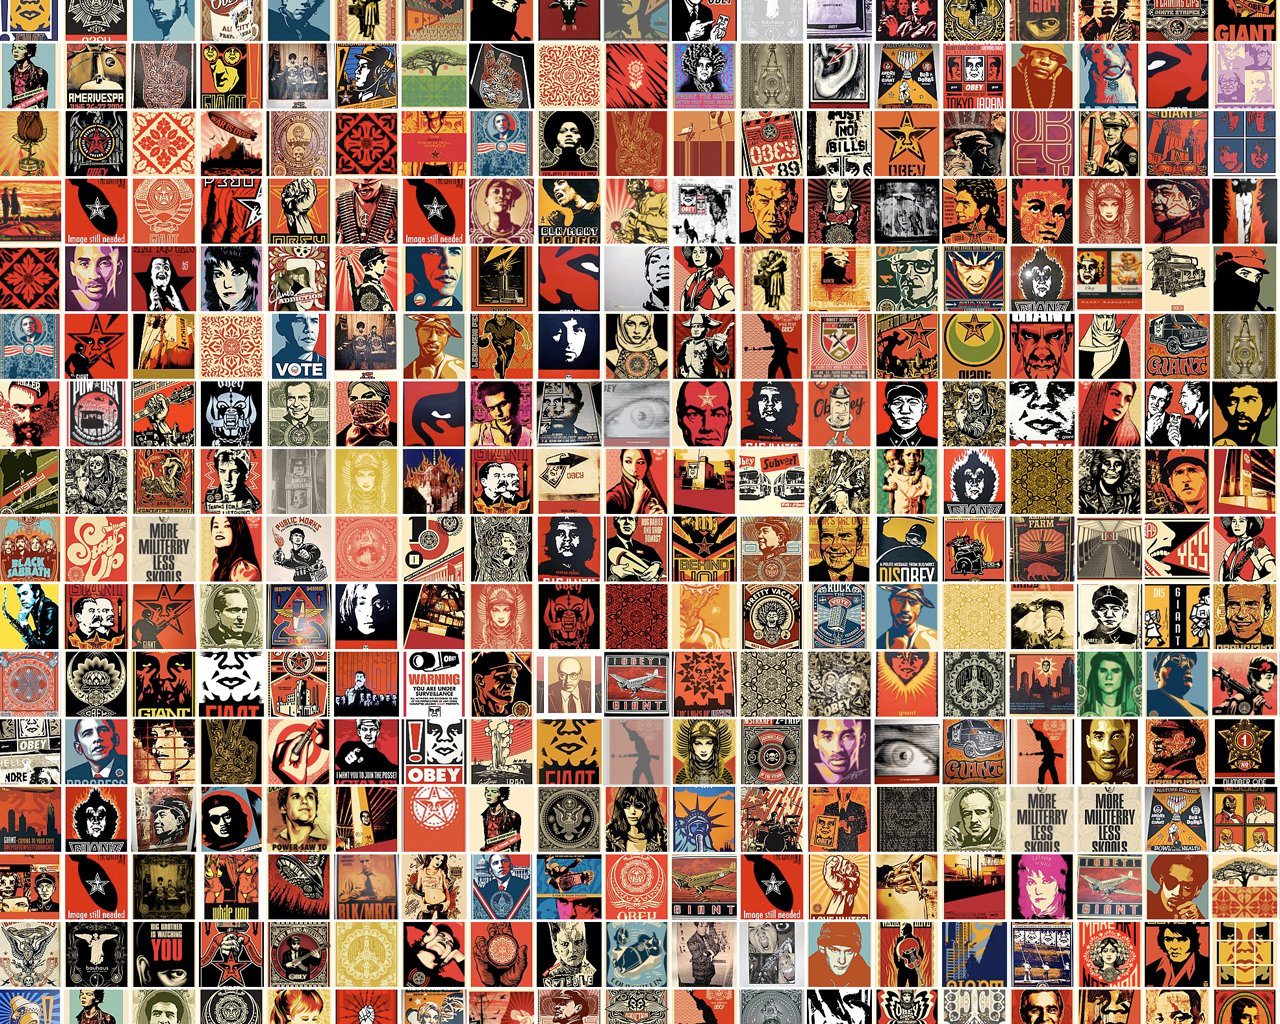 Obey Giant Collage Wallpaper